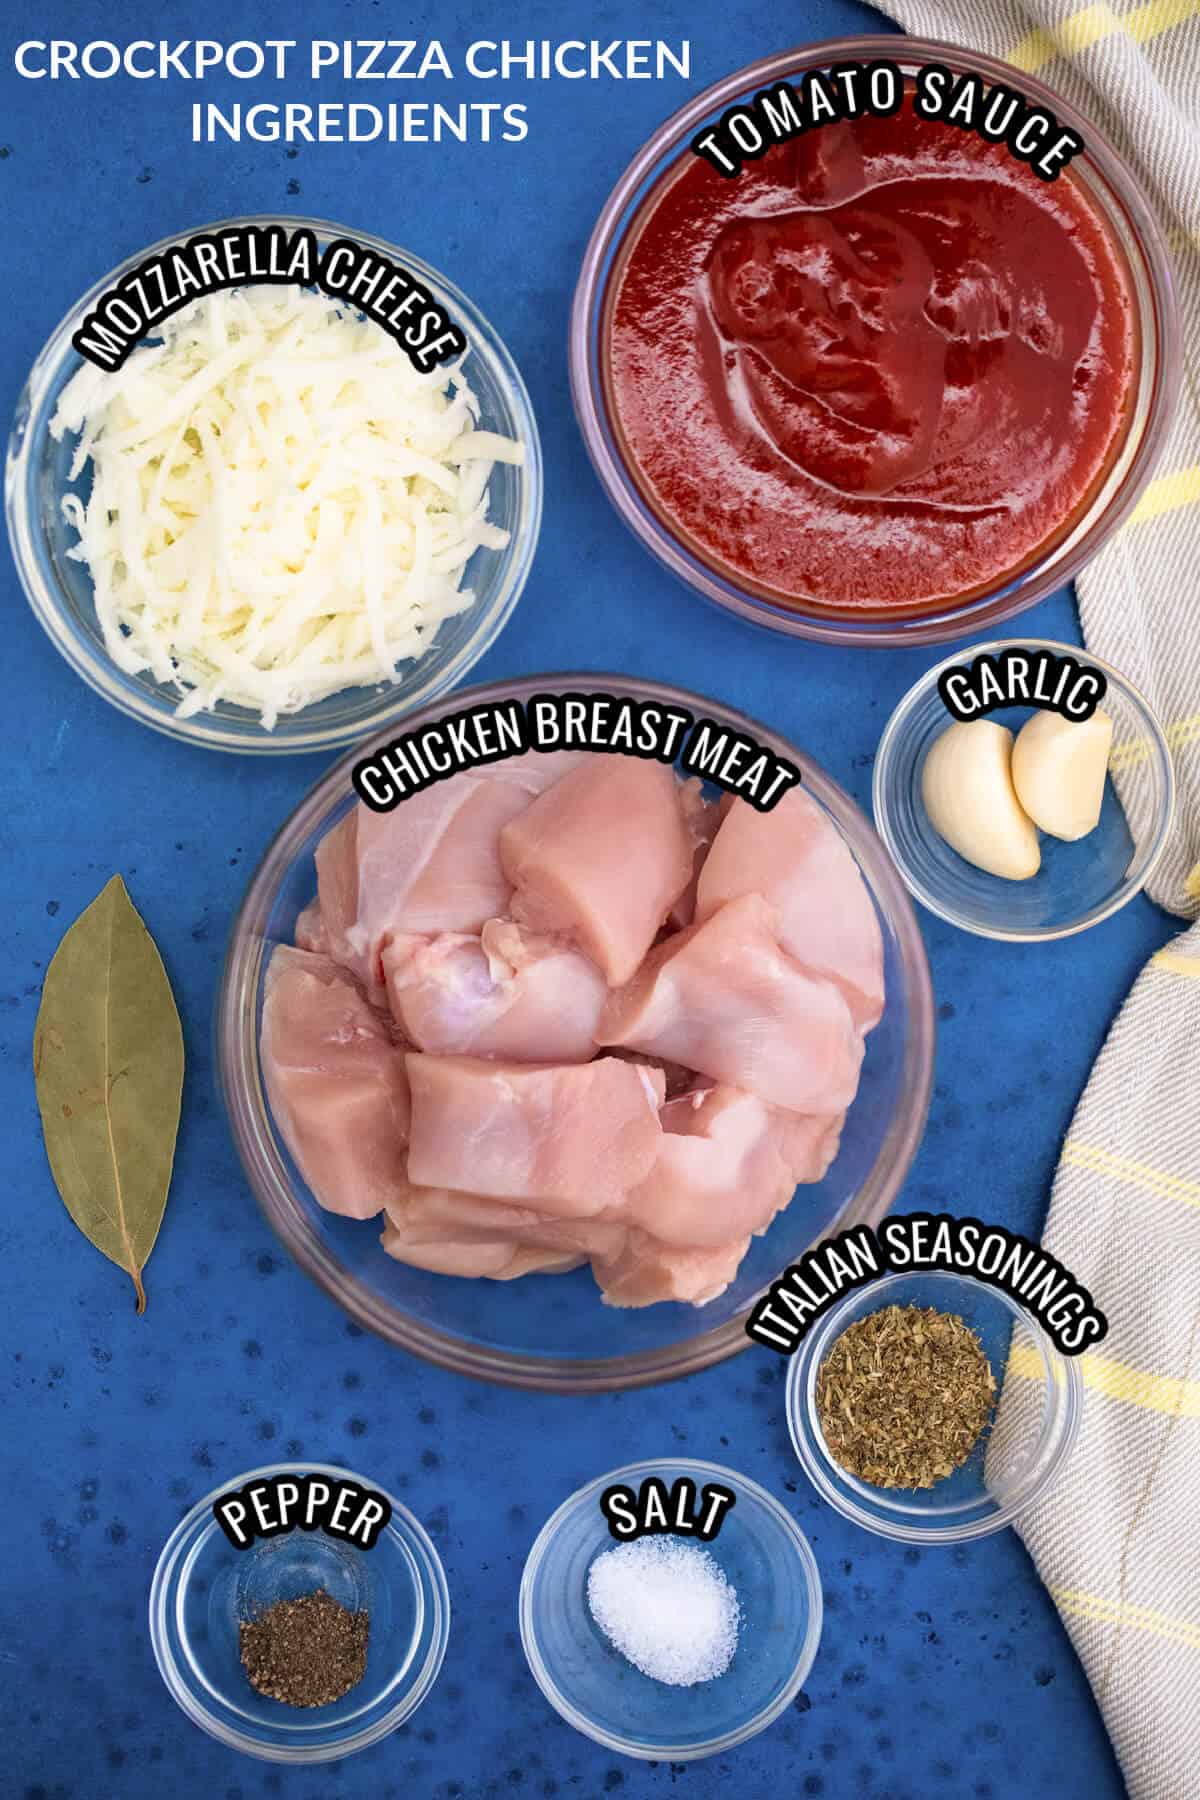 ingredients used in the recipe